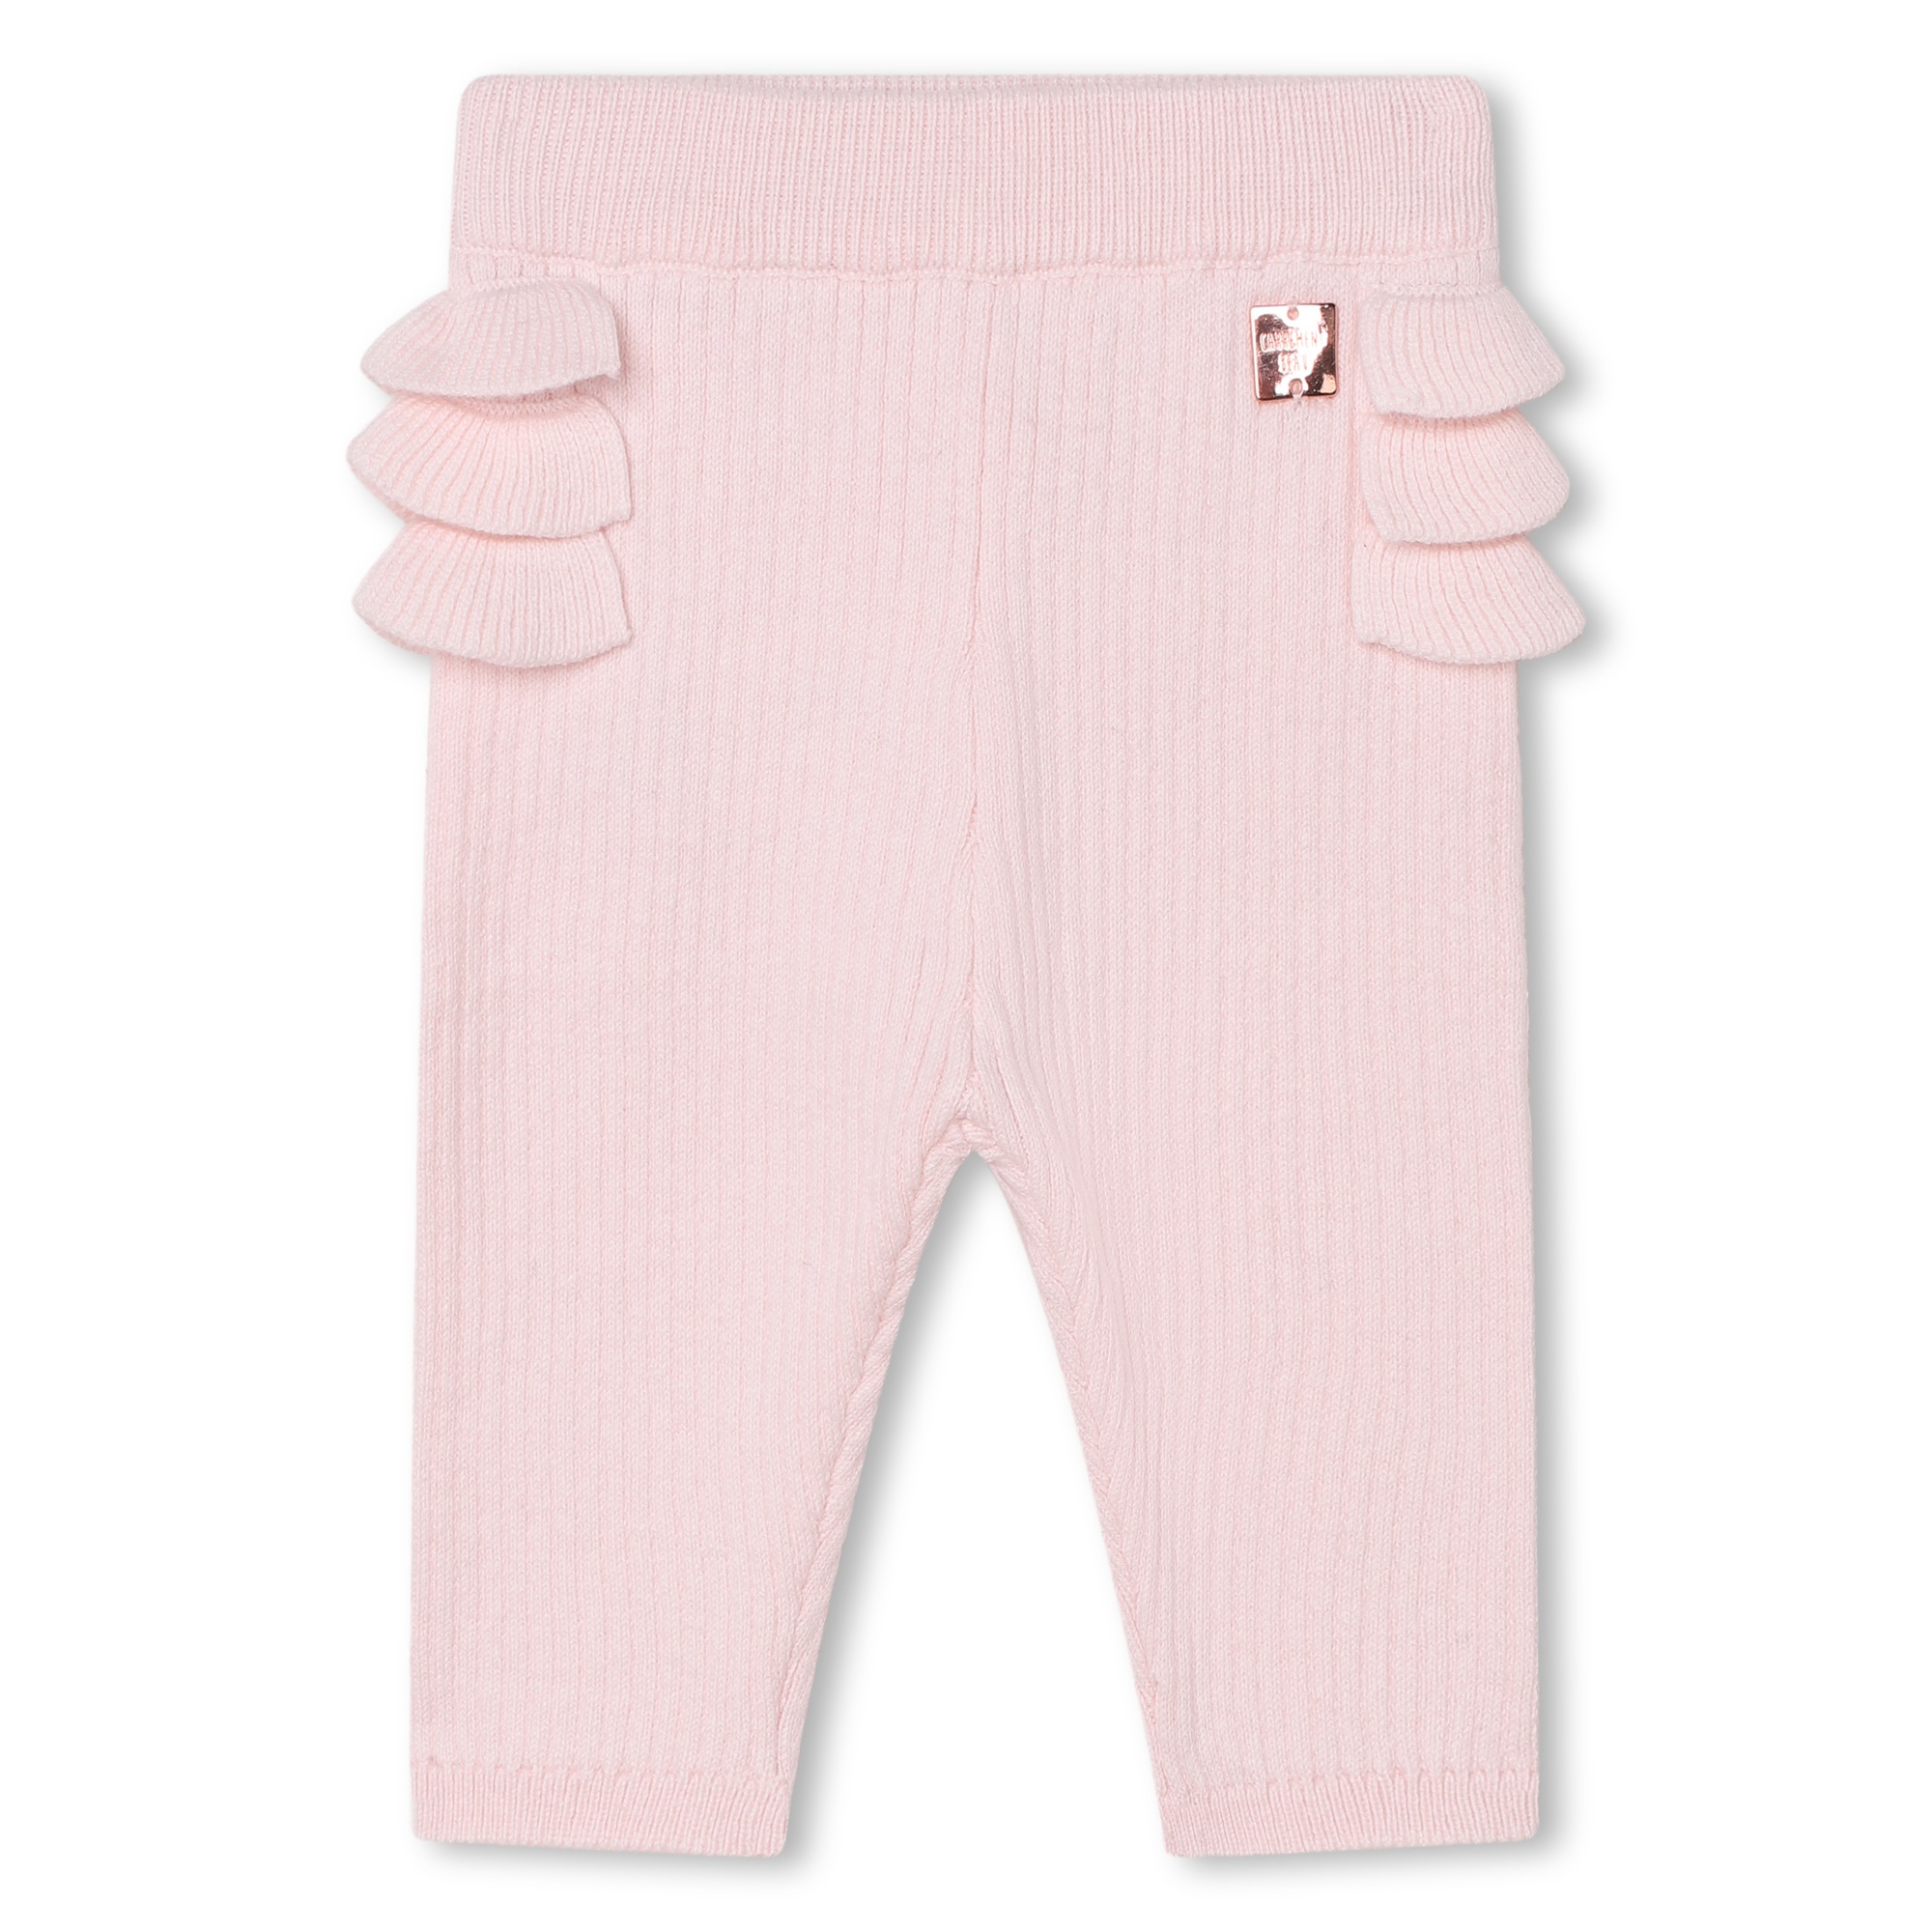 Tricot leggings with frills CARREMENT BEAU for GIRL